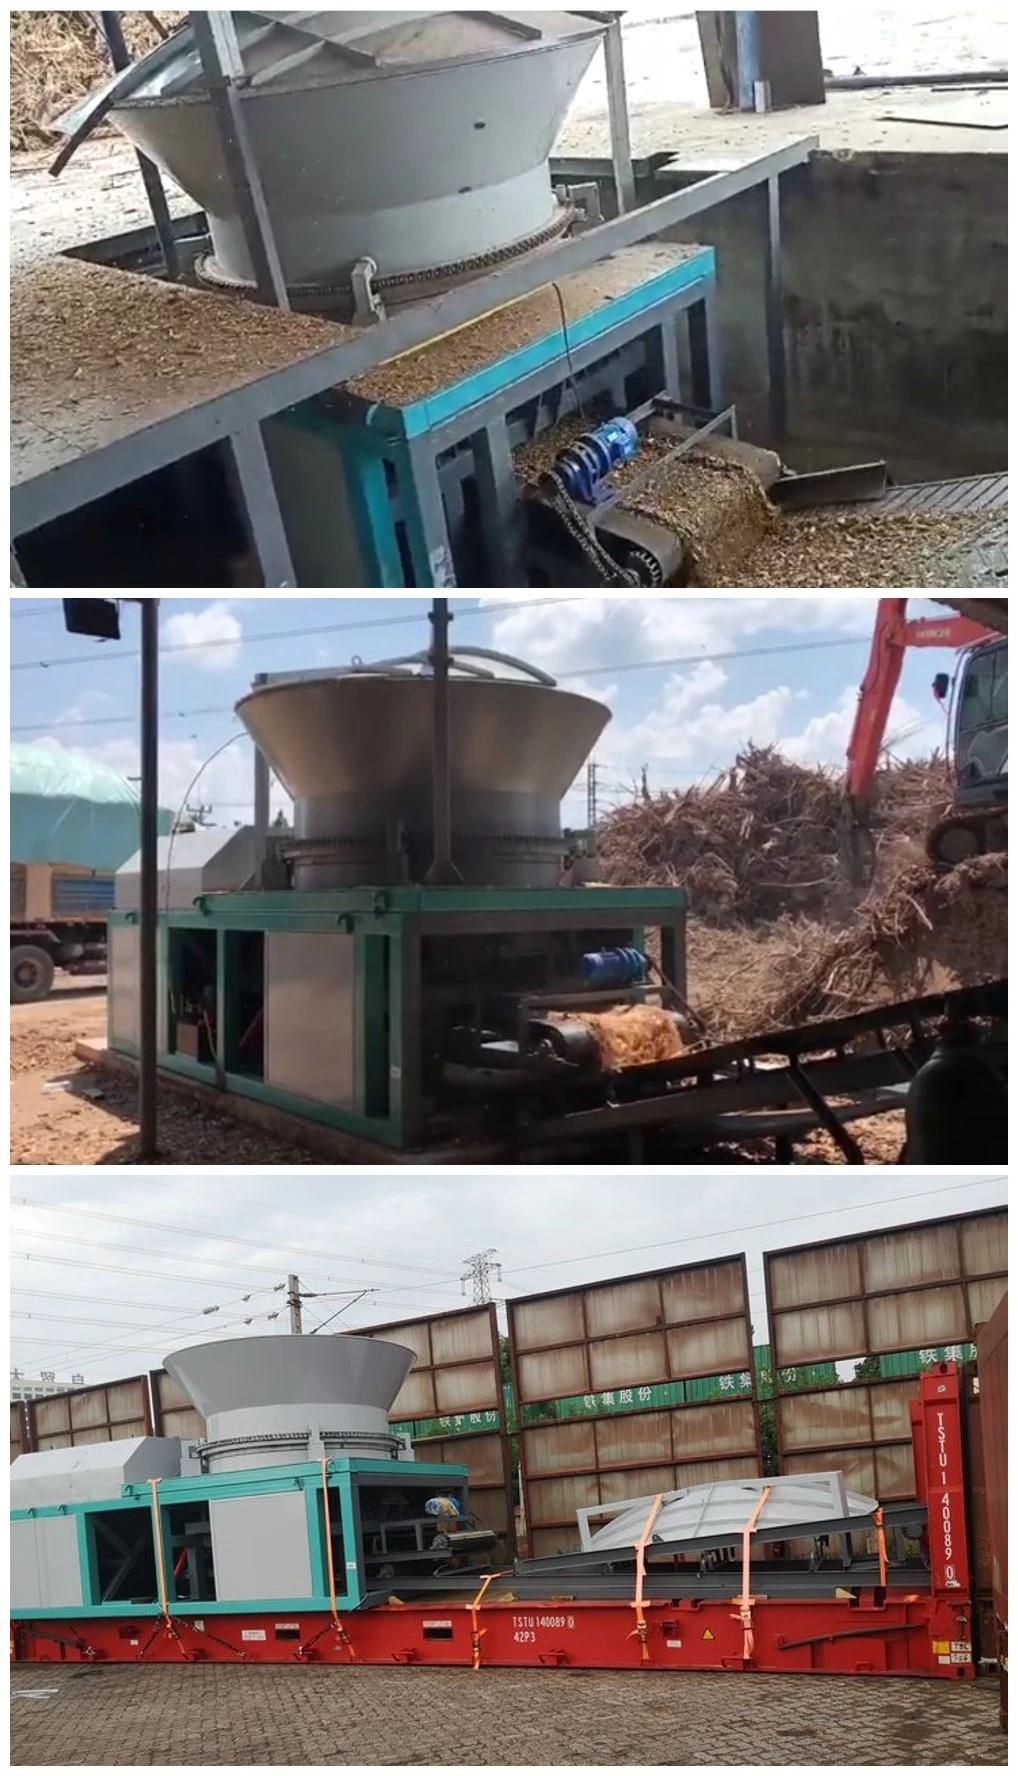 Shd Factory Supply Disc Wood Crusher for Tree Root